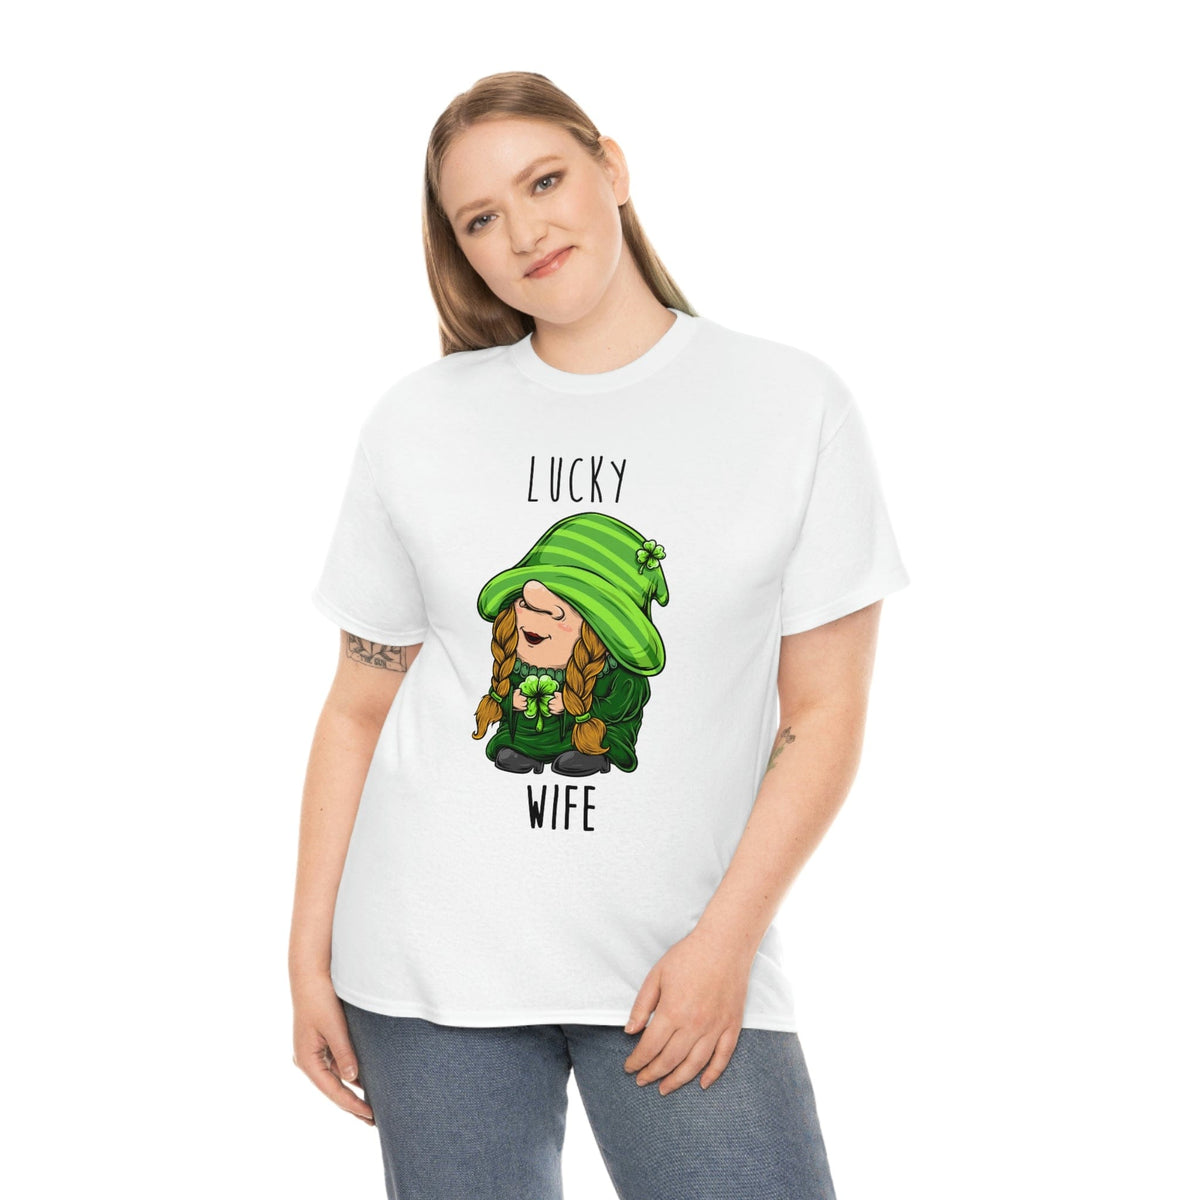 Lucky Husband &amp; Lucky Wife St. Patrick day Drinking Shirt